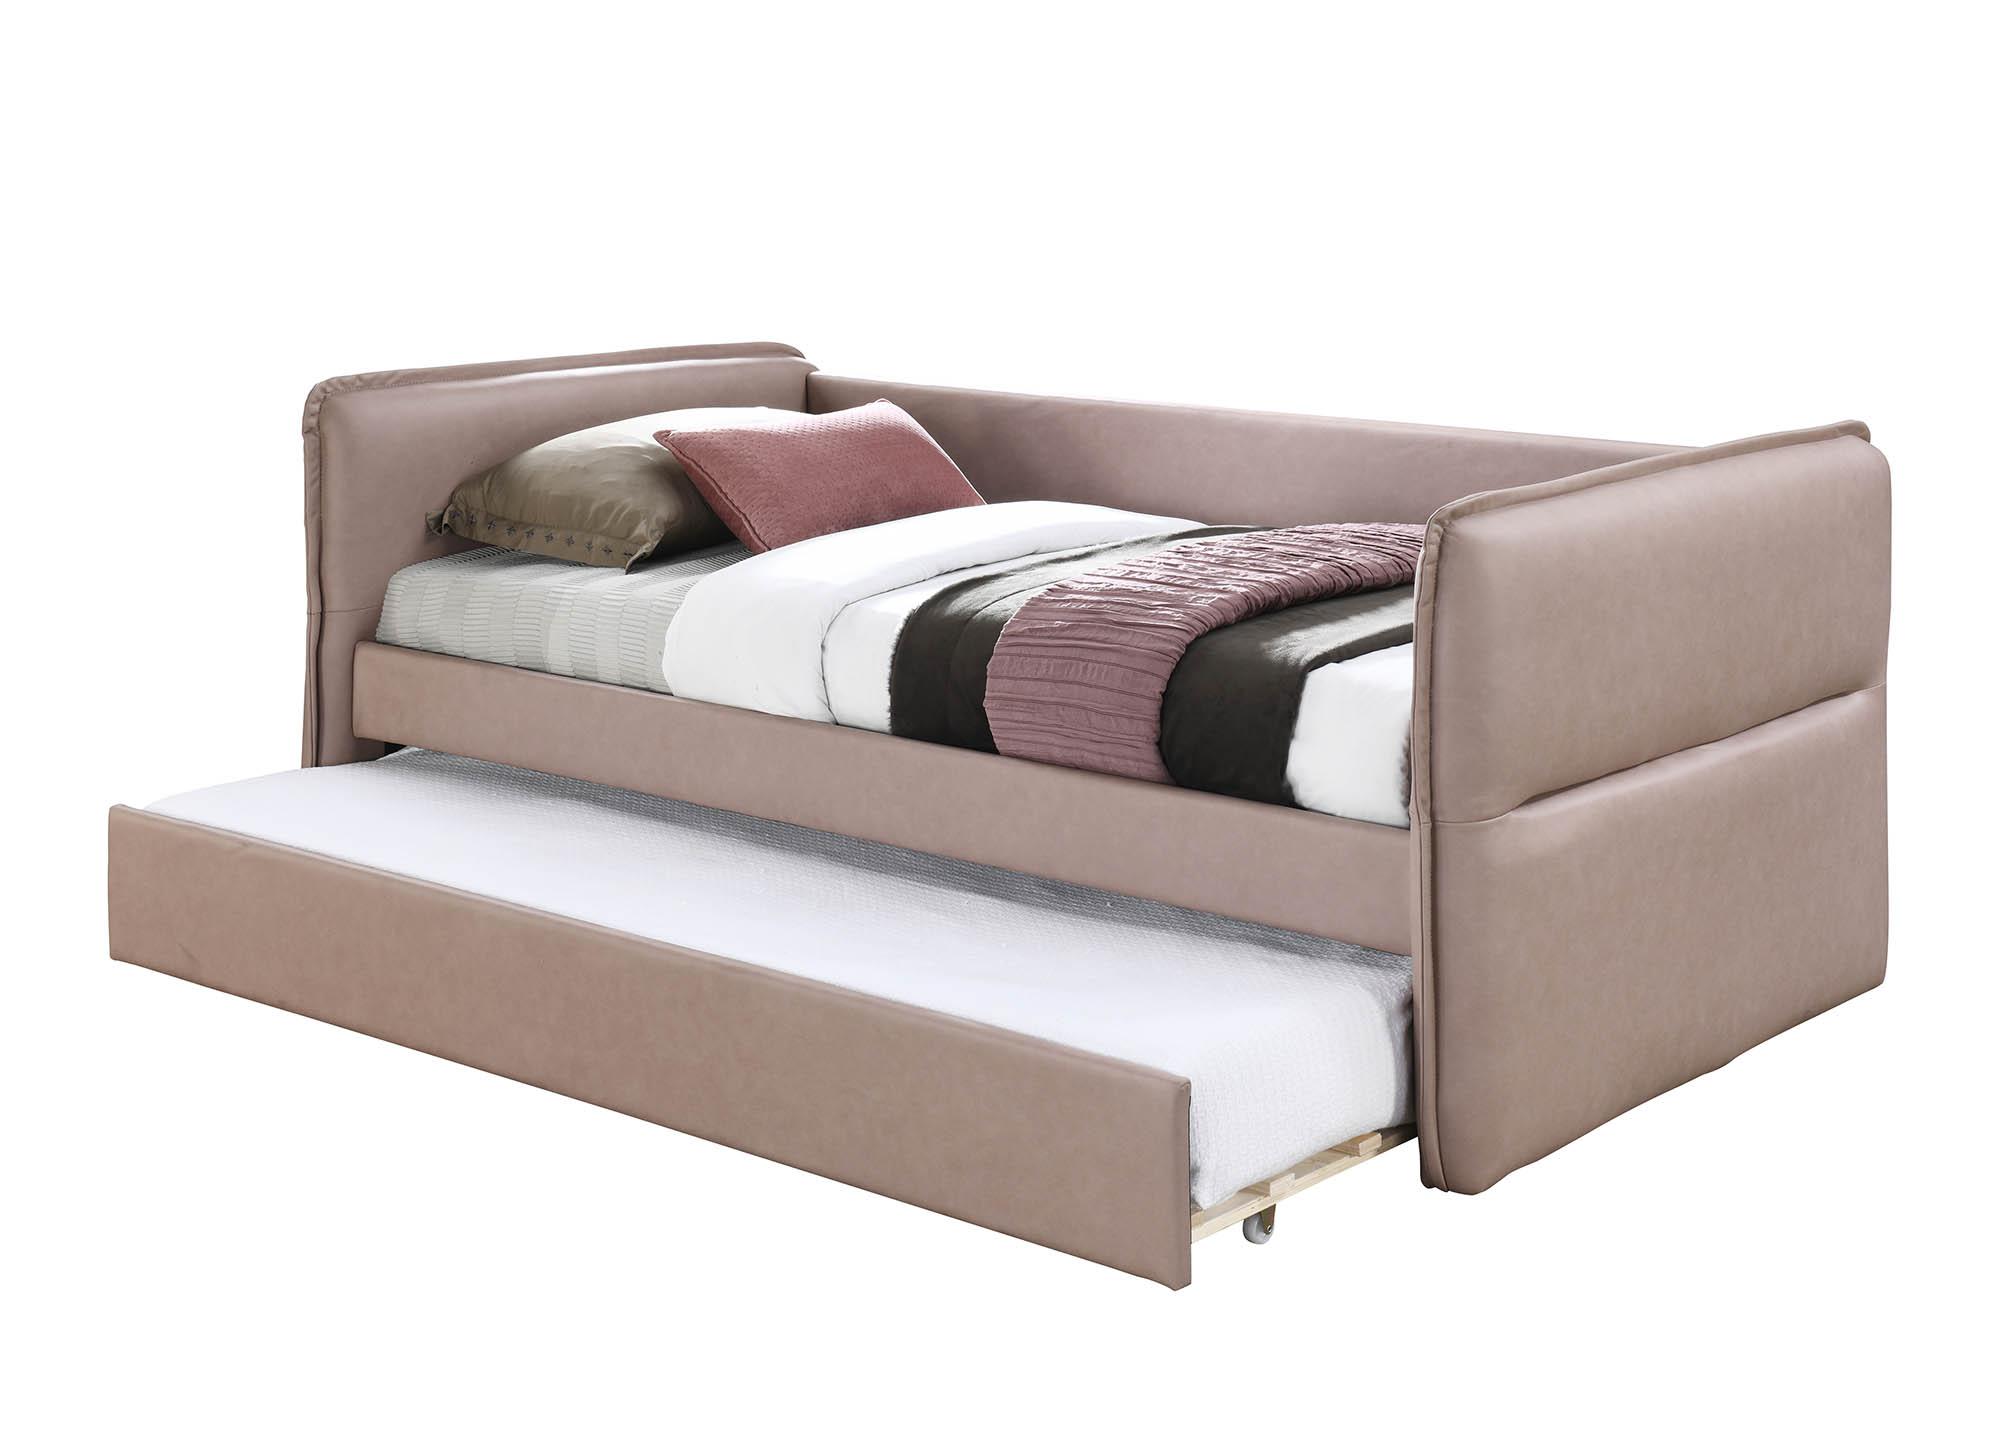 Modern, Transitional Trundle Bed TRINA 510-DR 510-DR in Rose Fabric